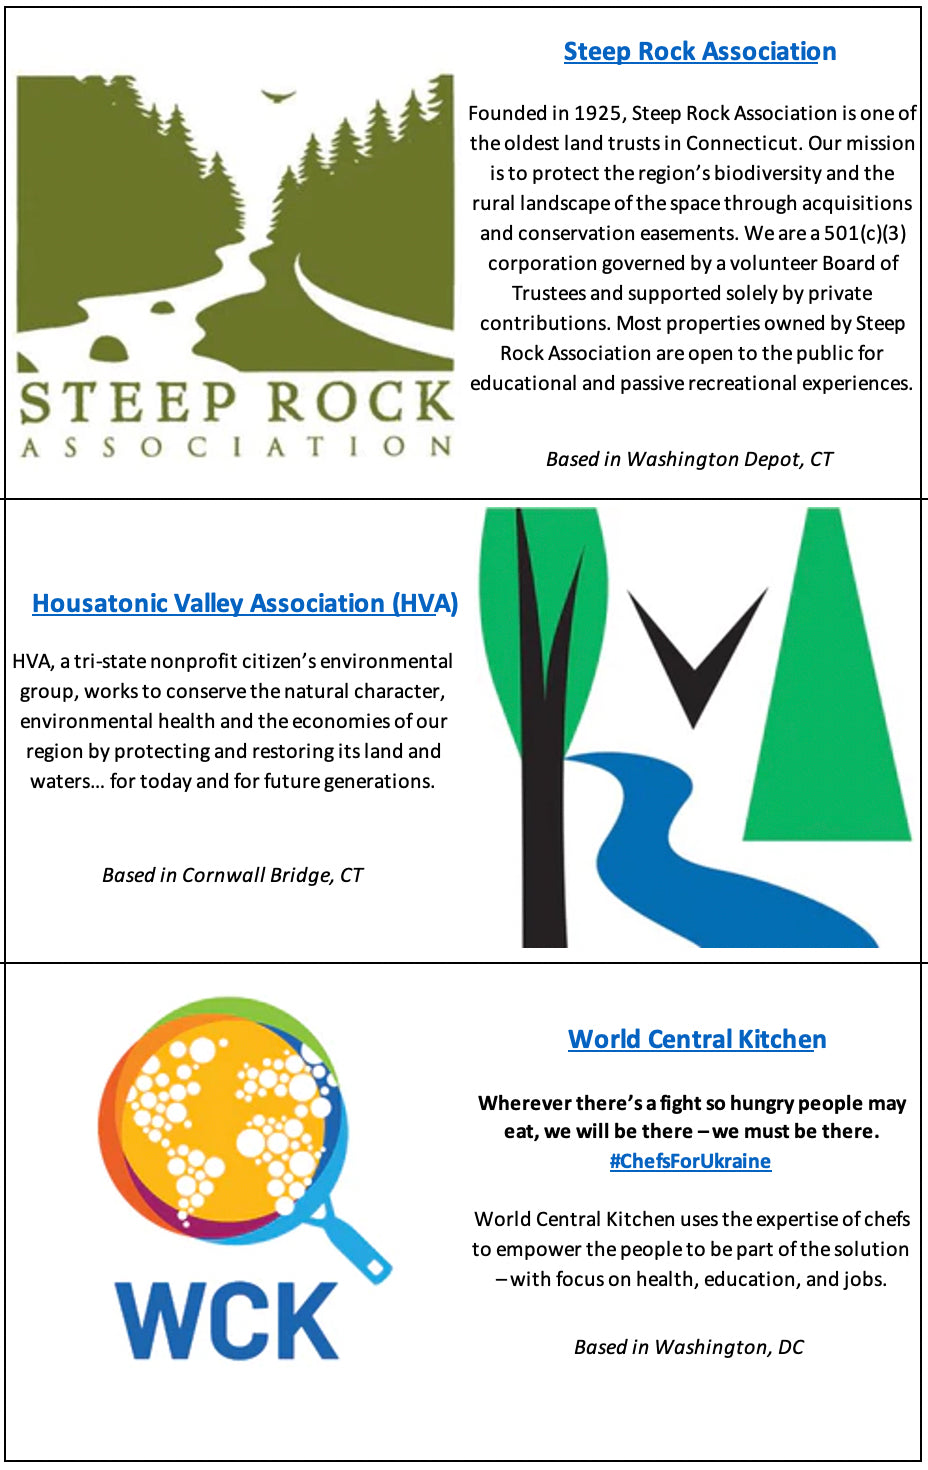 Steep Rock Association logo (green with trees and rivers) - one of the oldest land trusts in CT, Housatonic Valley Association (HVA - logo) - a tristate nonprofit citizen's environmental group, and World Central Kitchen (logo: a colorful skillet with yellow center, overlaid with white bubbles as if boiling) - a global nonprofit that uses the expertise of chefs to empower the people to be part of the solution